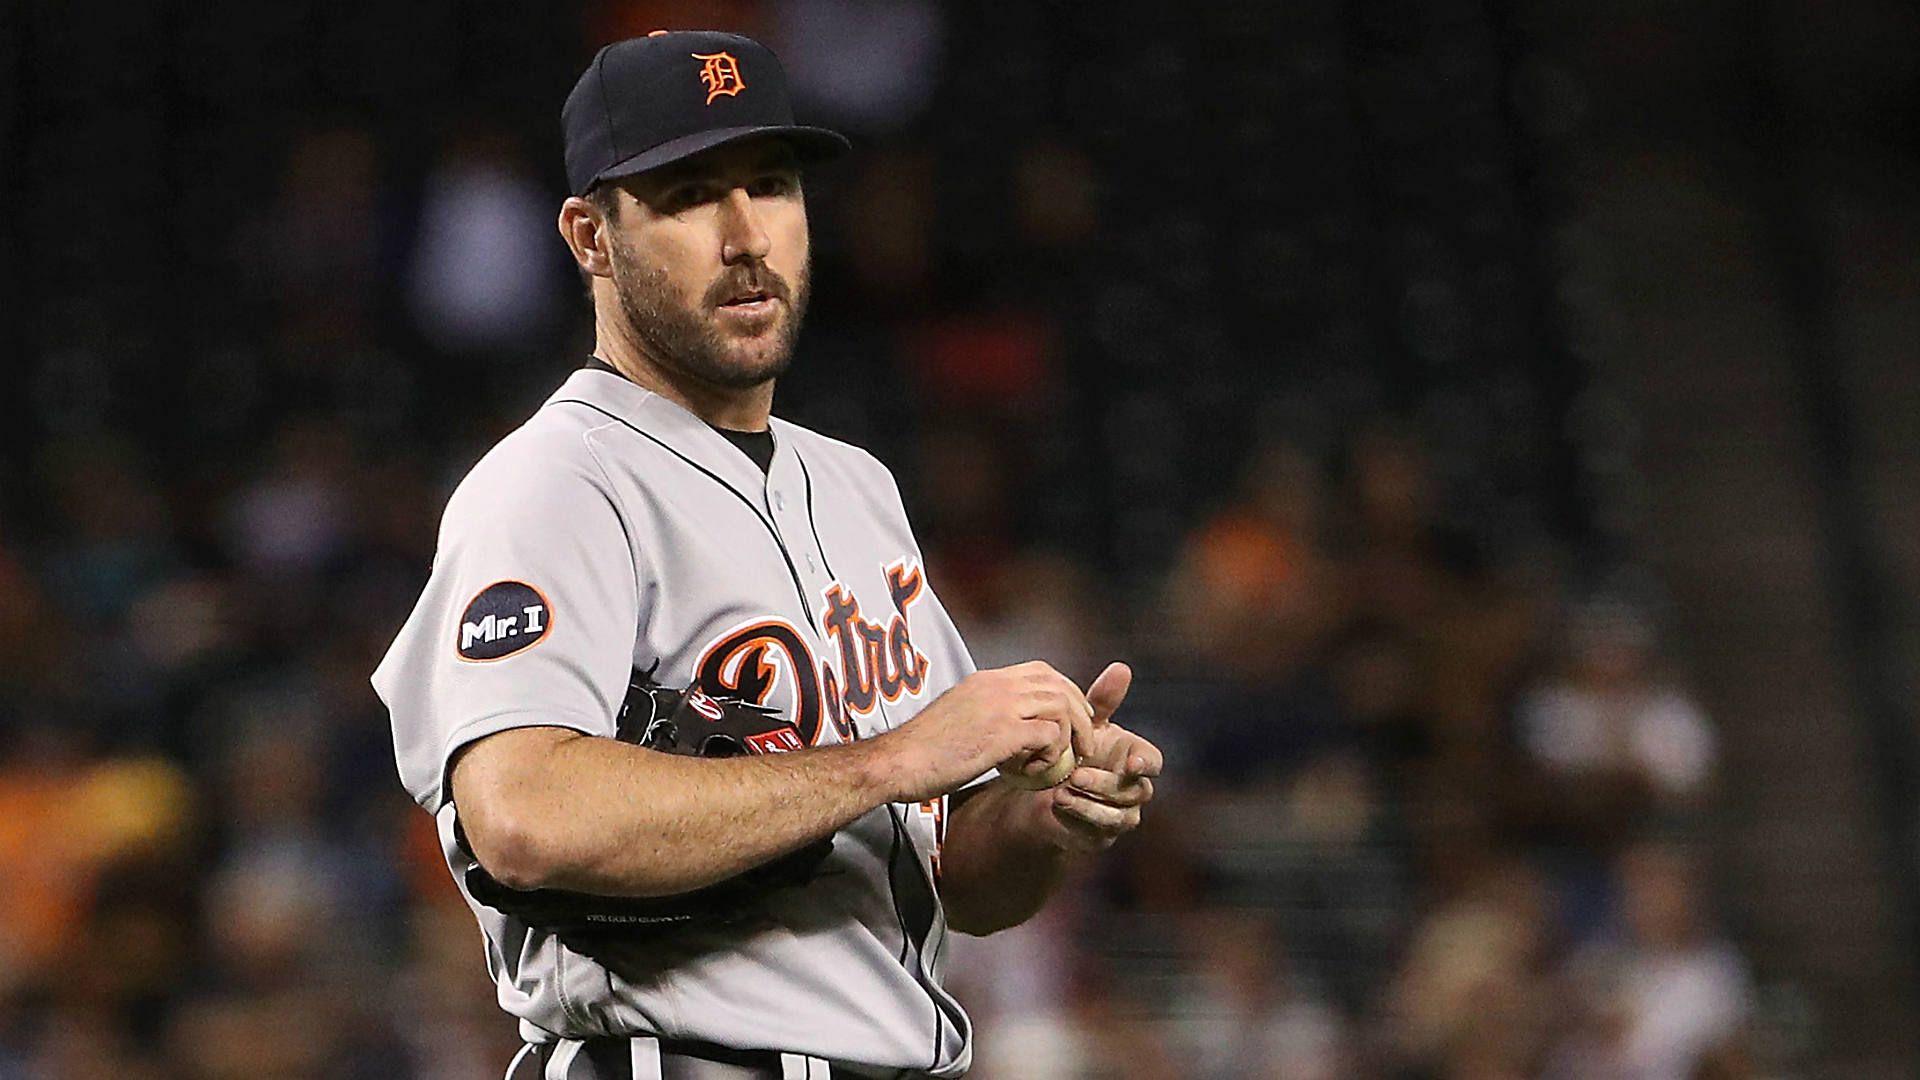 The complicated case of trading Tigers icon Justin Verlander. MLB